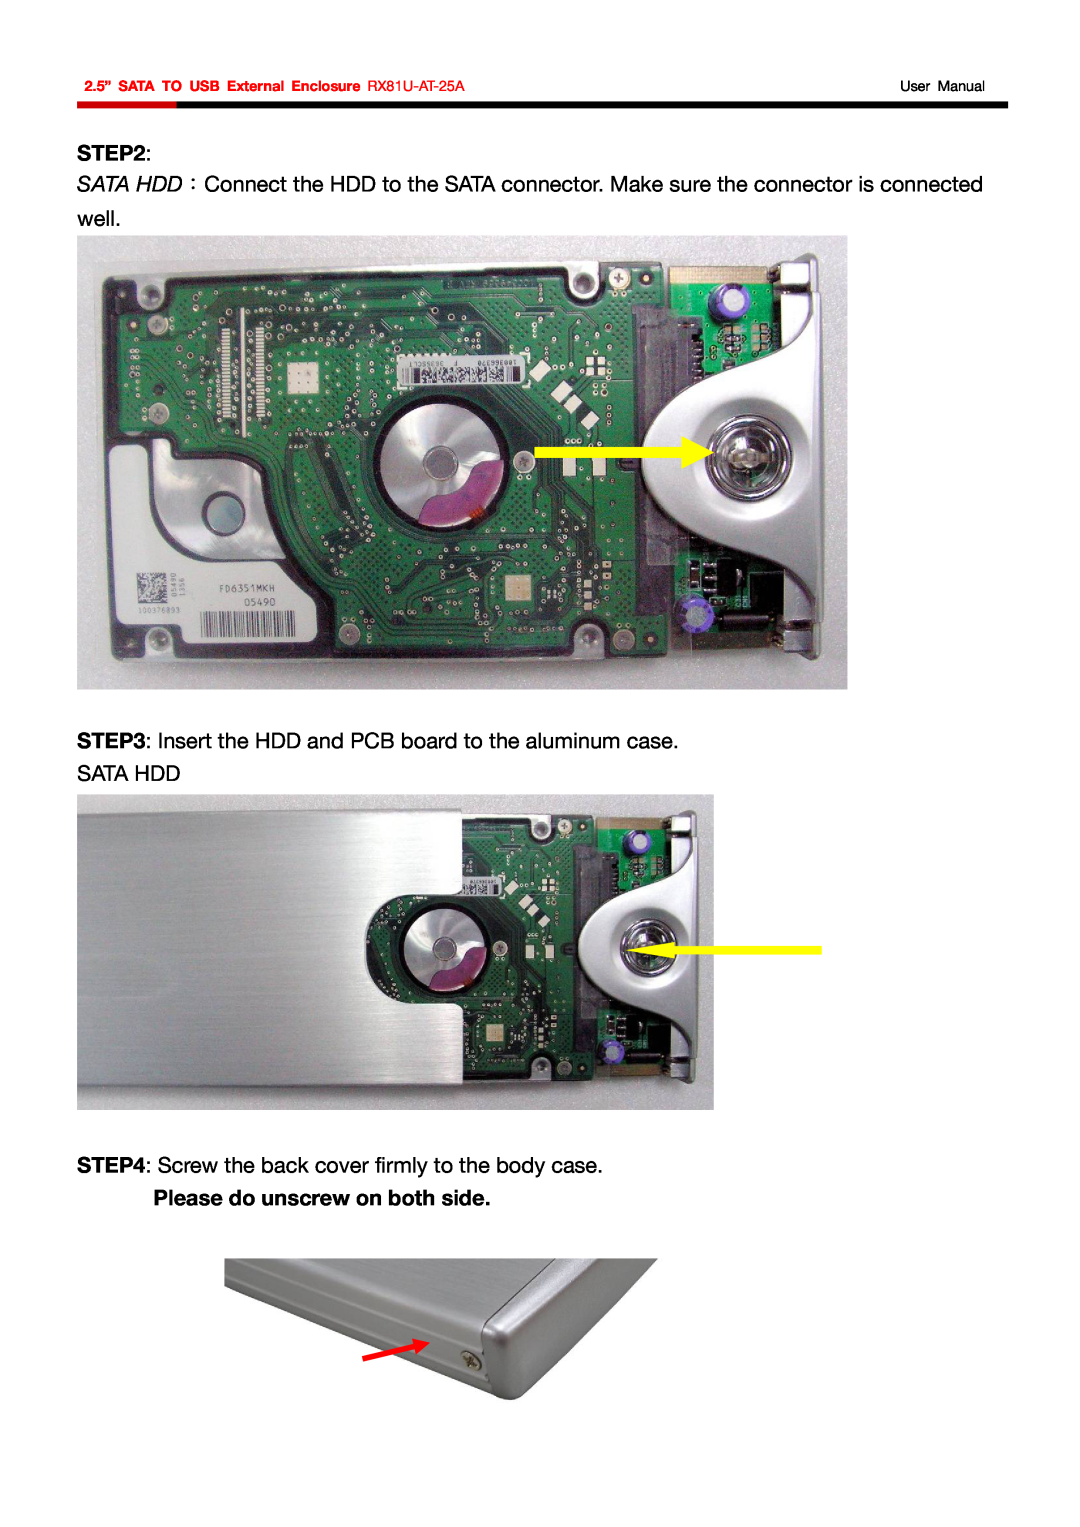 Rosewill RX81U-AT-25A Please do unscrew on both side, Insert the HDD and PCB board to the aluminum case SATA HDD 